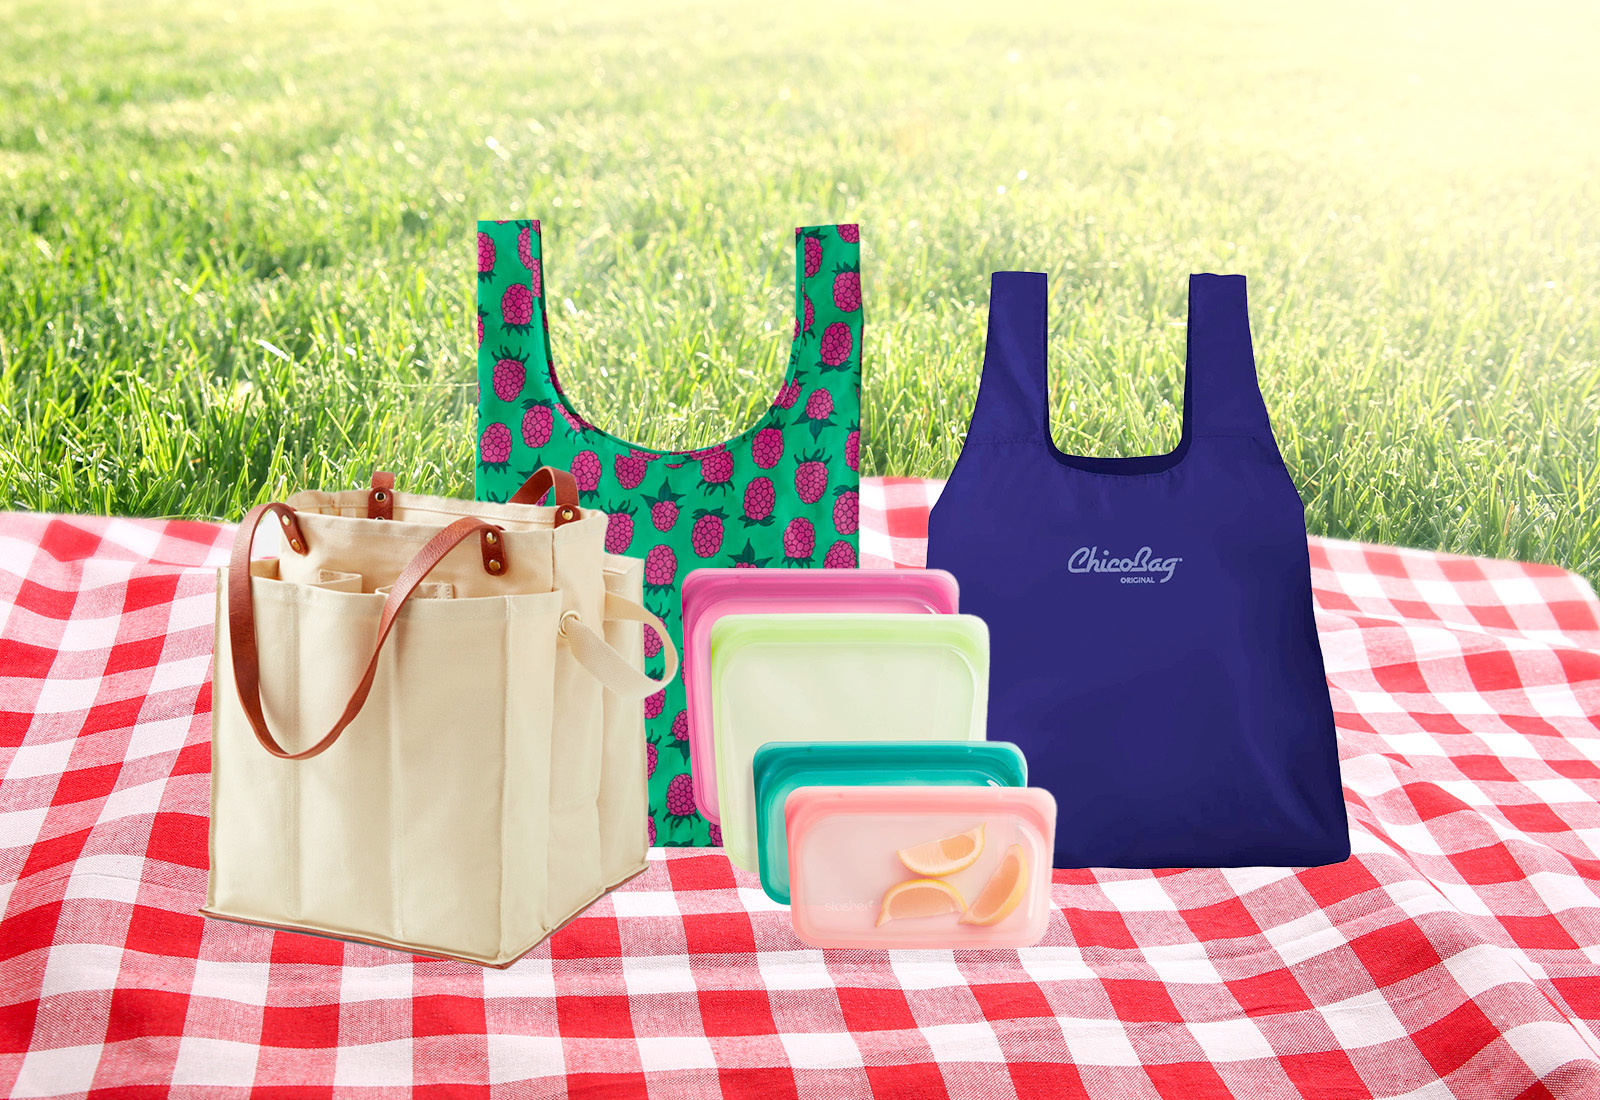 Are Reusable Bags Good for the Environment? | Reader's Digest